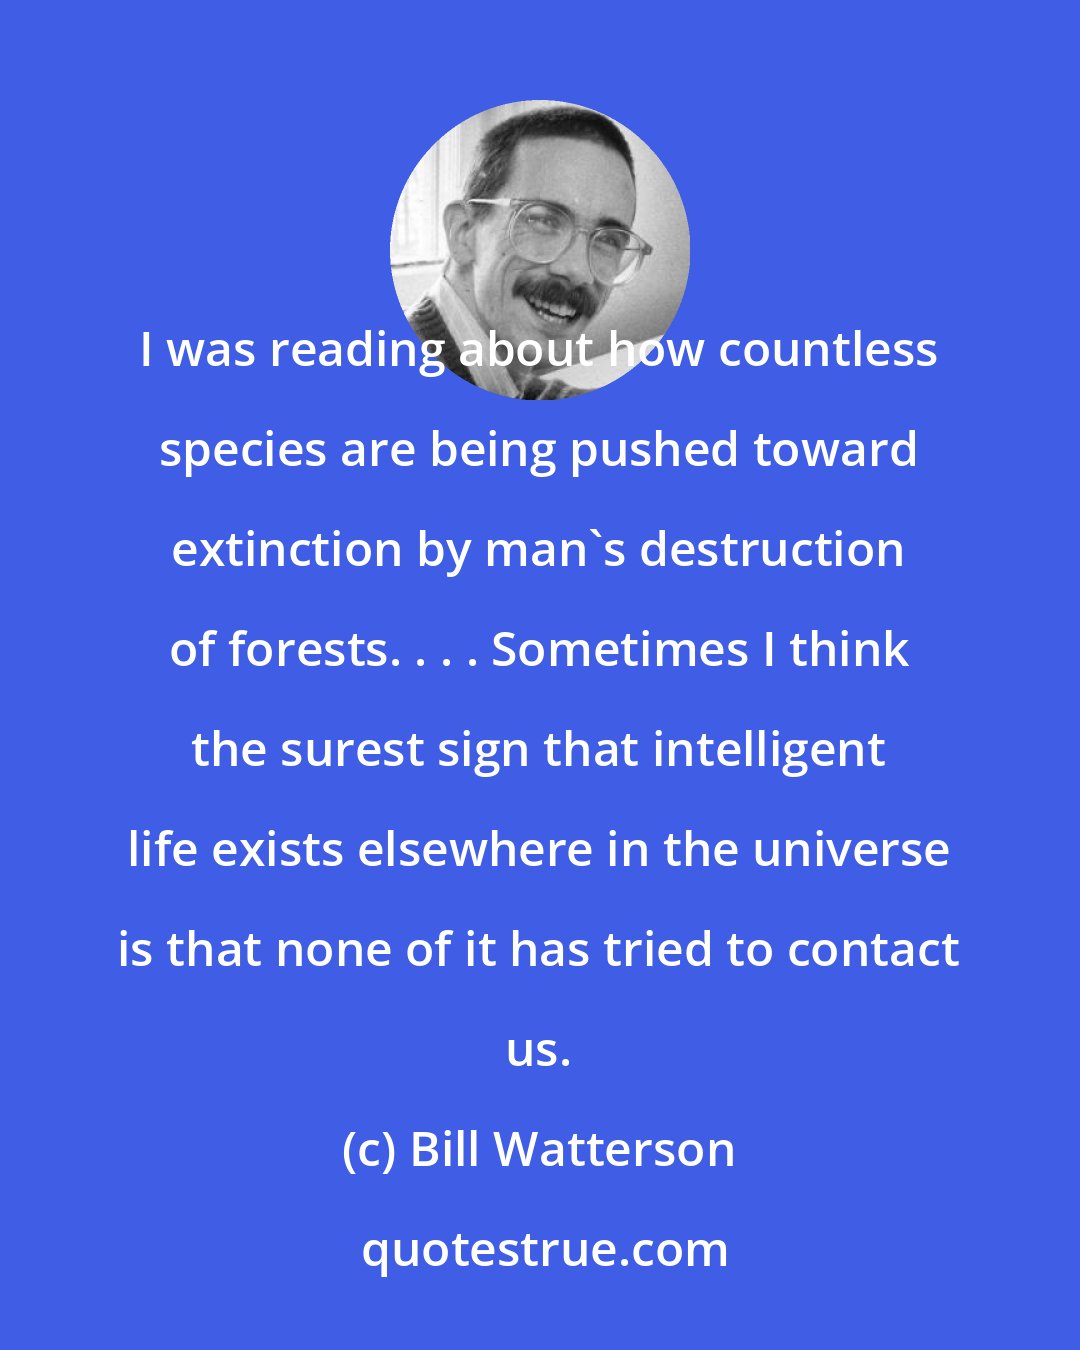 Bill Watterson: I was reading about how countless species are being pushed toward extinction by man's destruction of forests. . . . Sometimes I think the surest sign that intelligent life exists elsewhere in the universe is that none of it has tried to contact us.